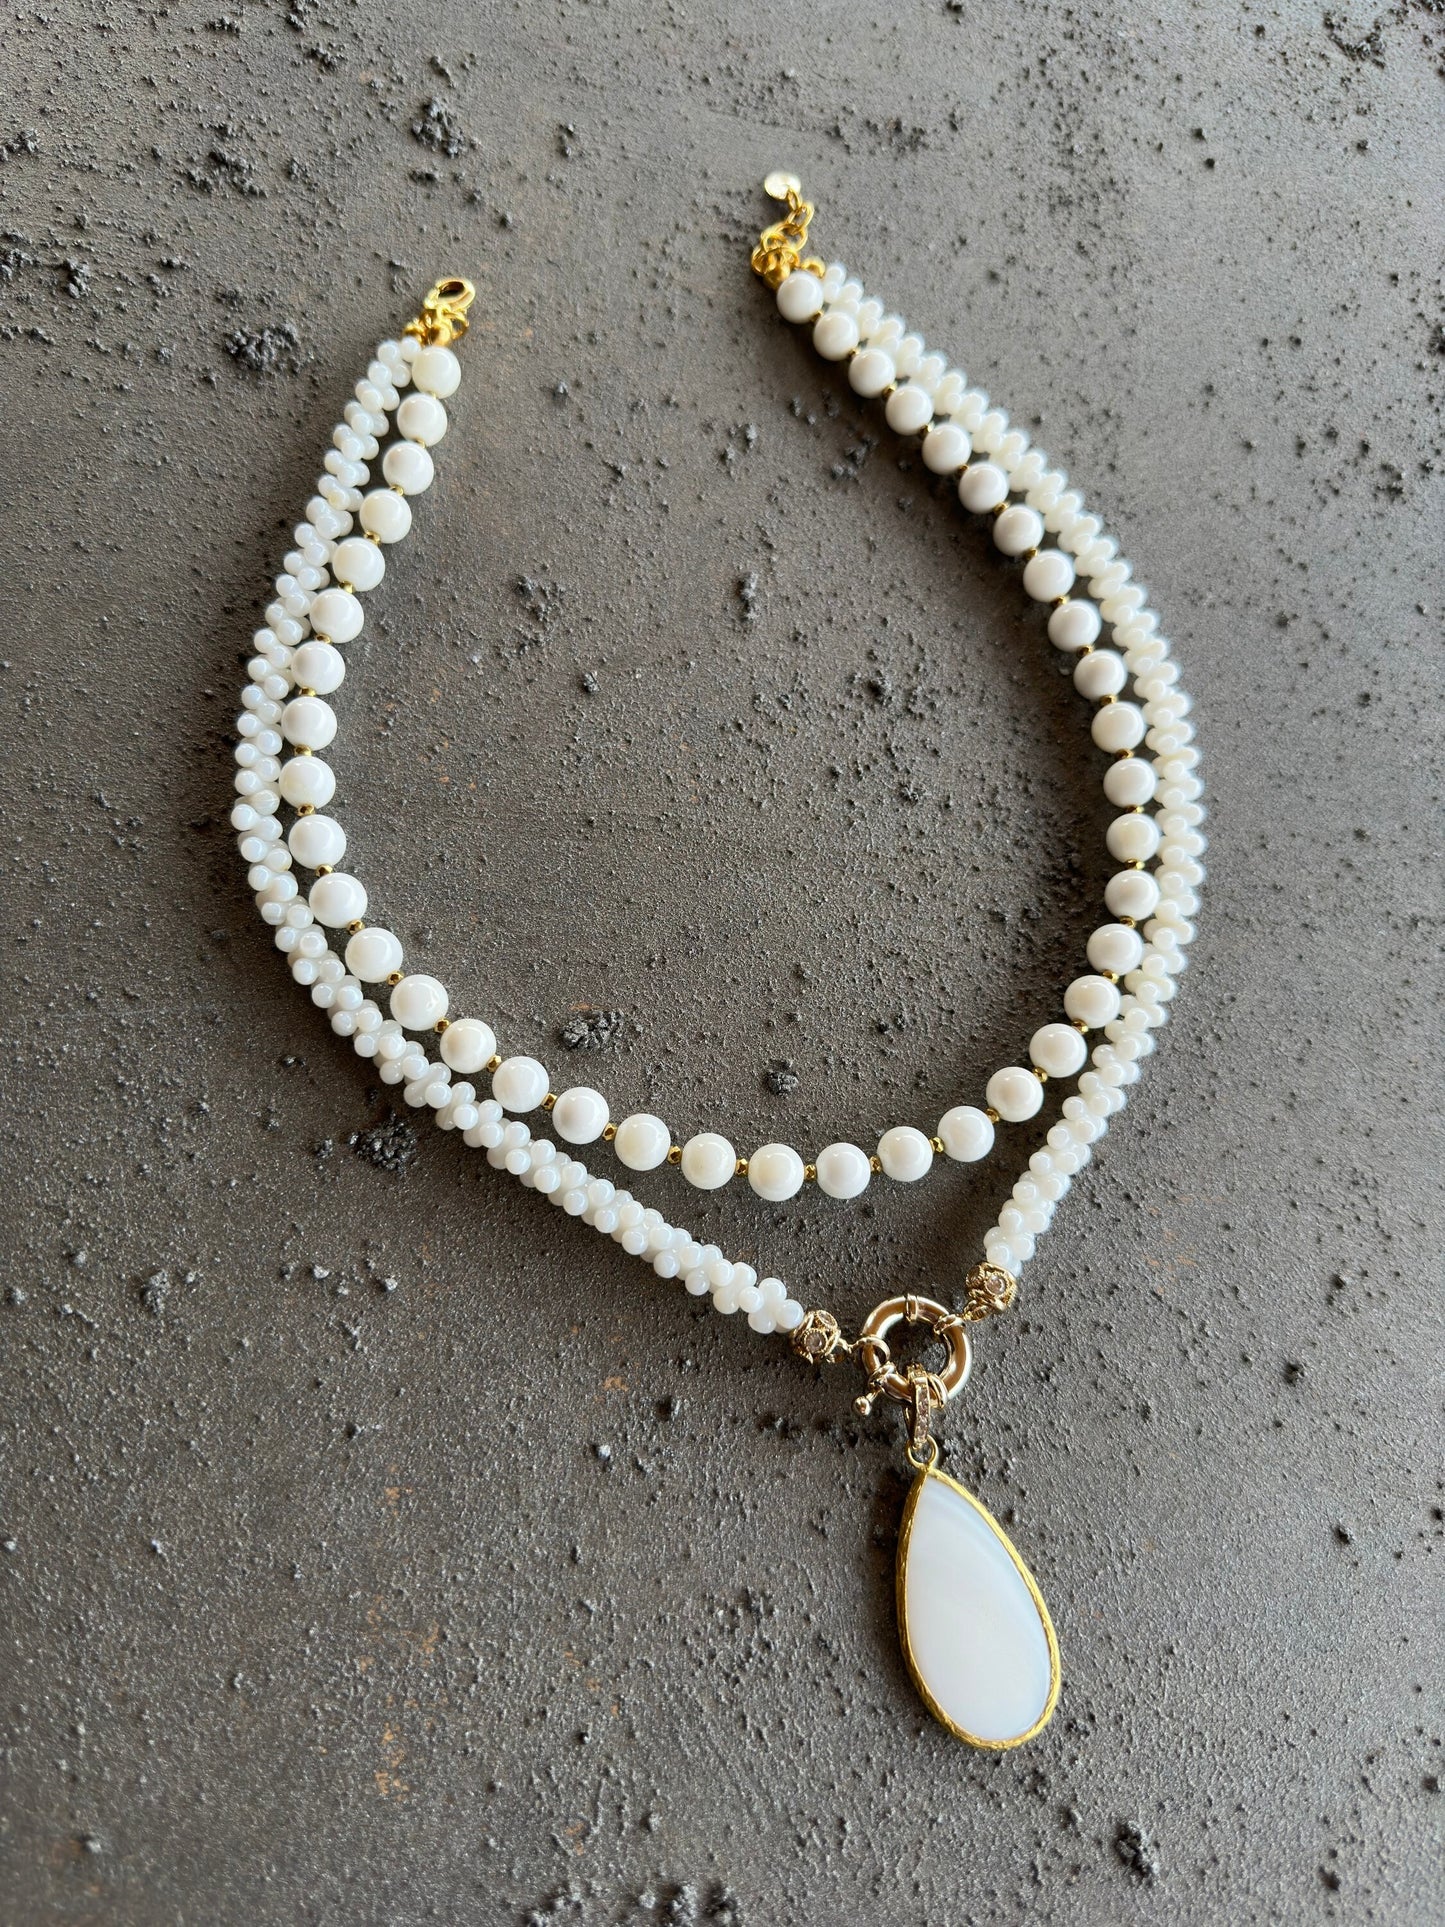 Shell Necklace, SeaShell Statement Necklace, Unique White Handmade Jewelry for Women, Birthday Gift for Friend